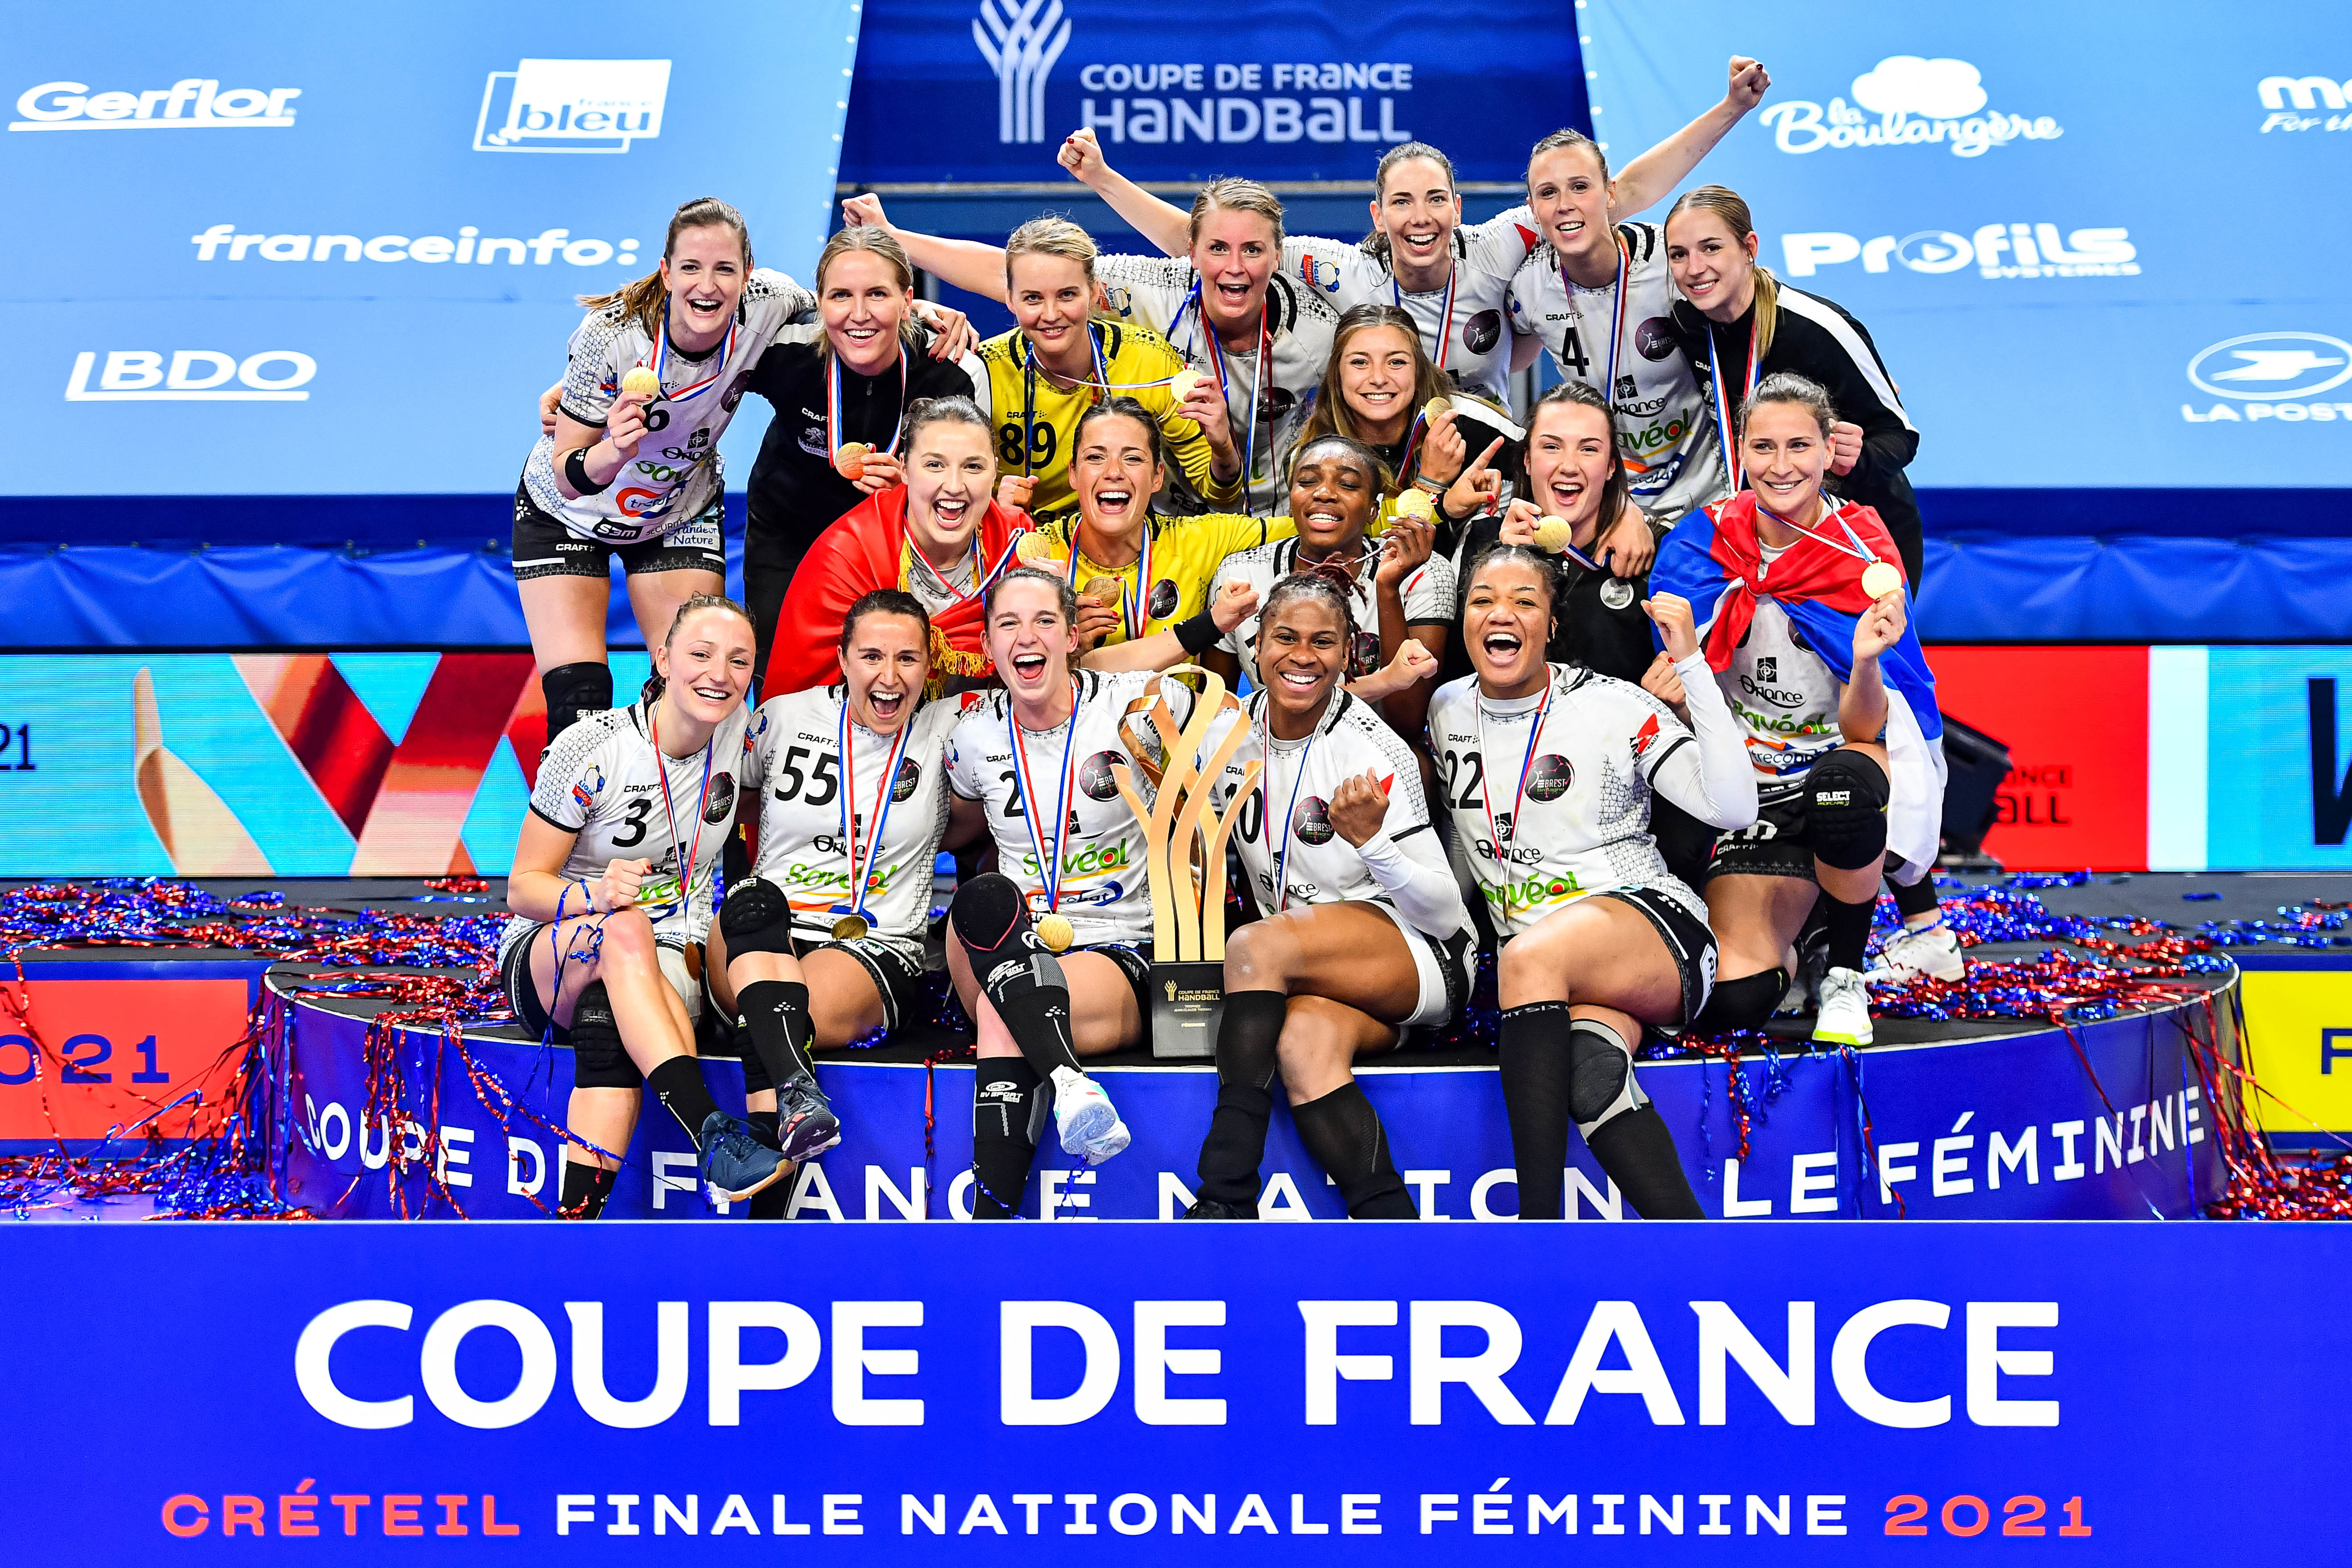 Players of Brest celebrate their victory with the trophy during the women's French Cup handball final match between Nantes and Brest on May 15, 2021 in Creteil, France. (Photo by Baptiste Fernandez/Icon Sport)